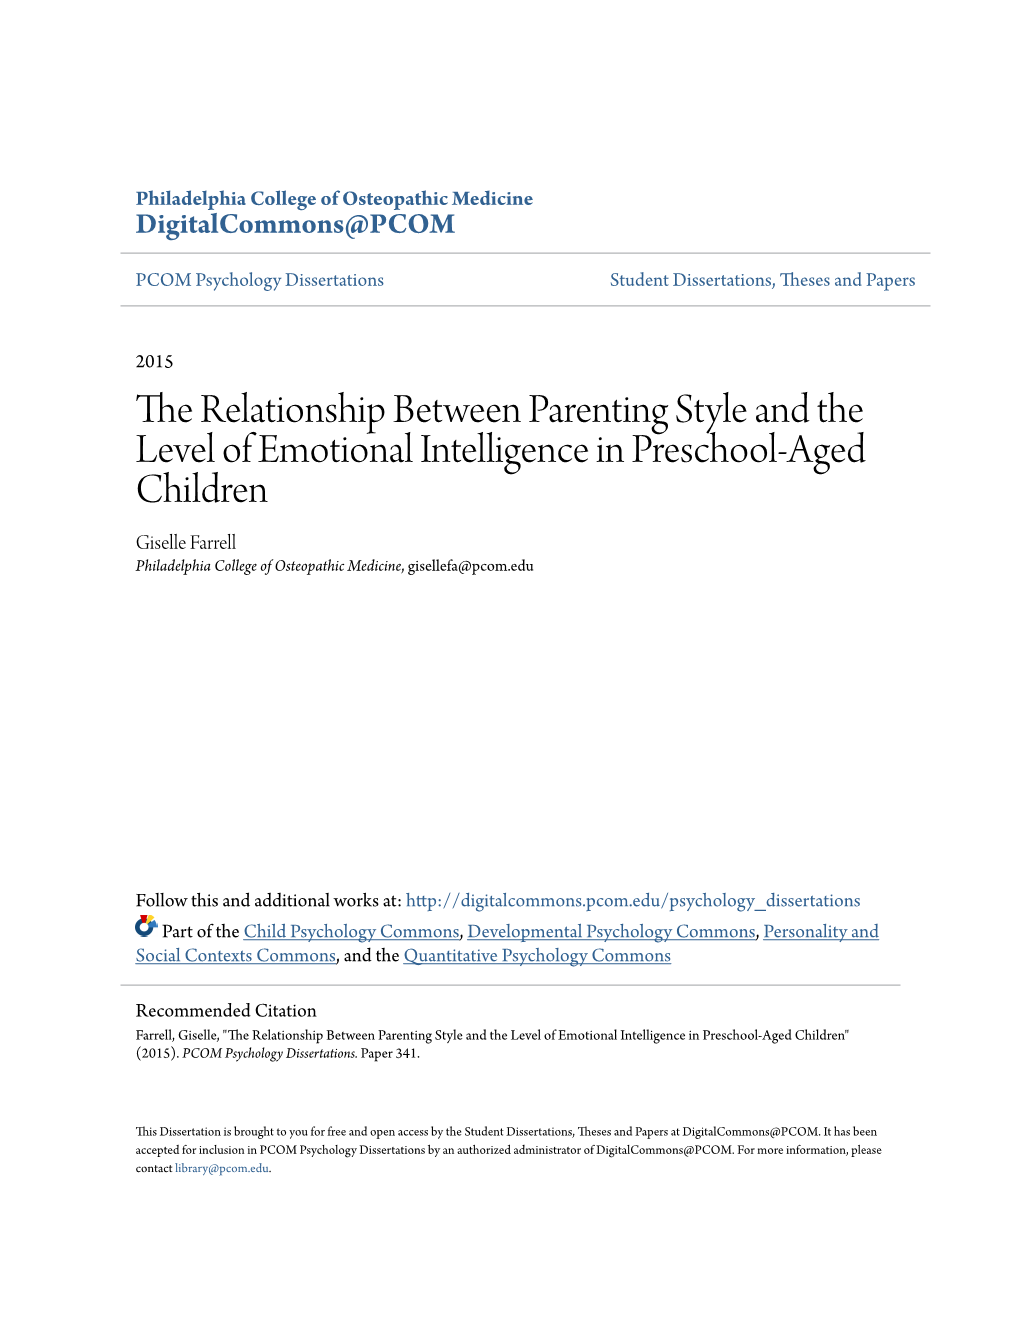 The Relationship Between Parenting Style and the Level of Emotional Intelligence in Preschool-Aged Children